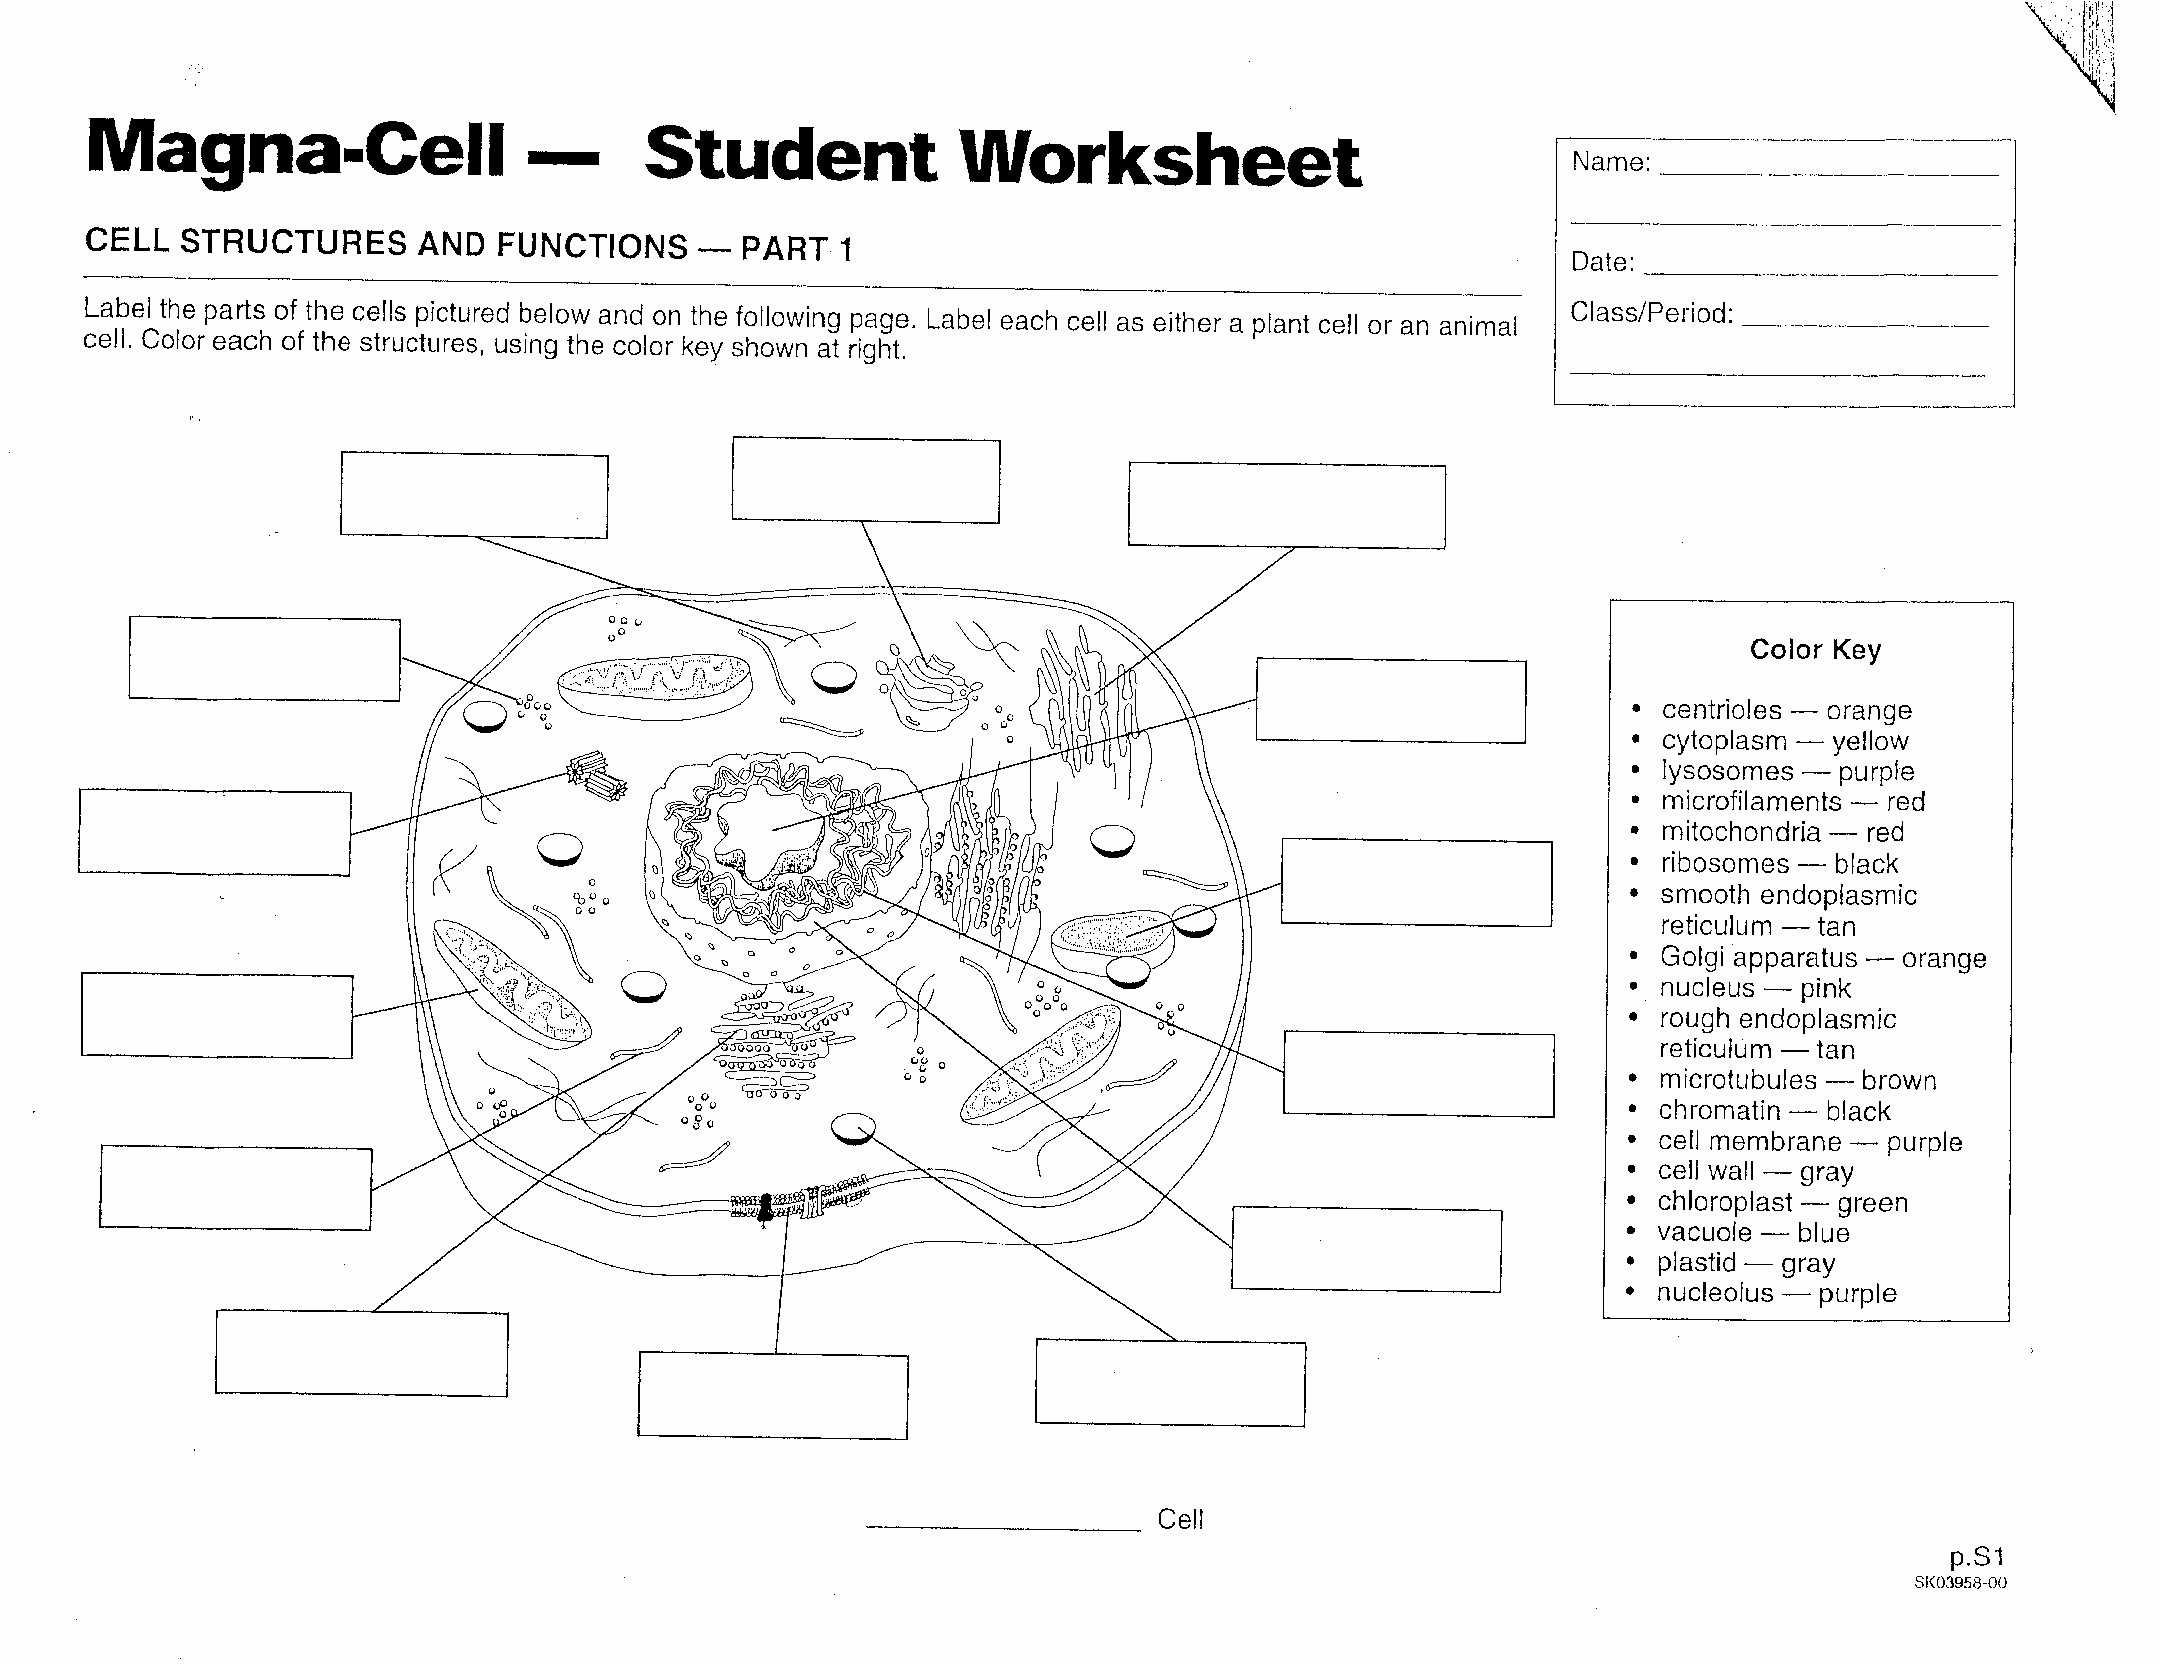 Cell Structure and Function Worksheet Answers Chapter 3 as Well as Inside the Cell Worksheet Answers Best 710 Best Cells